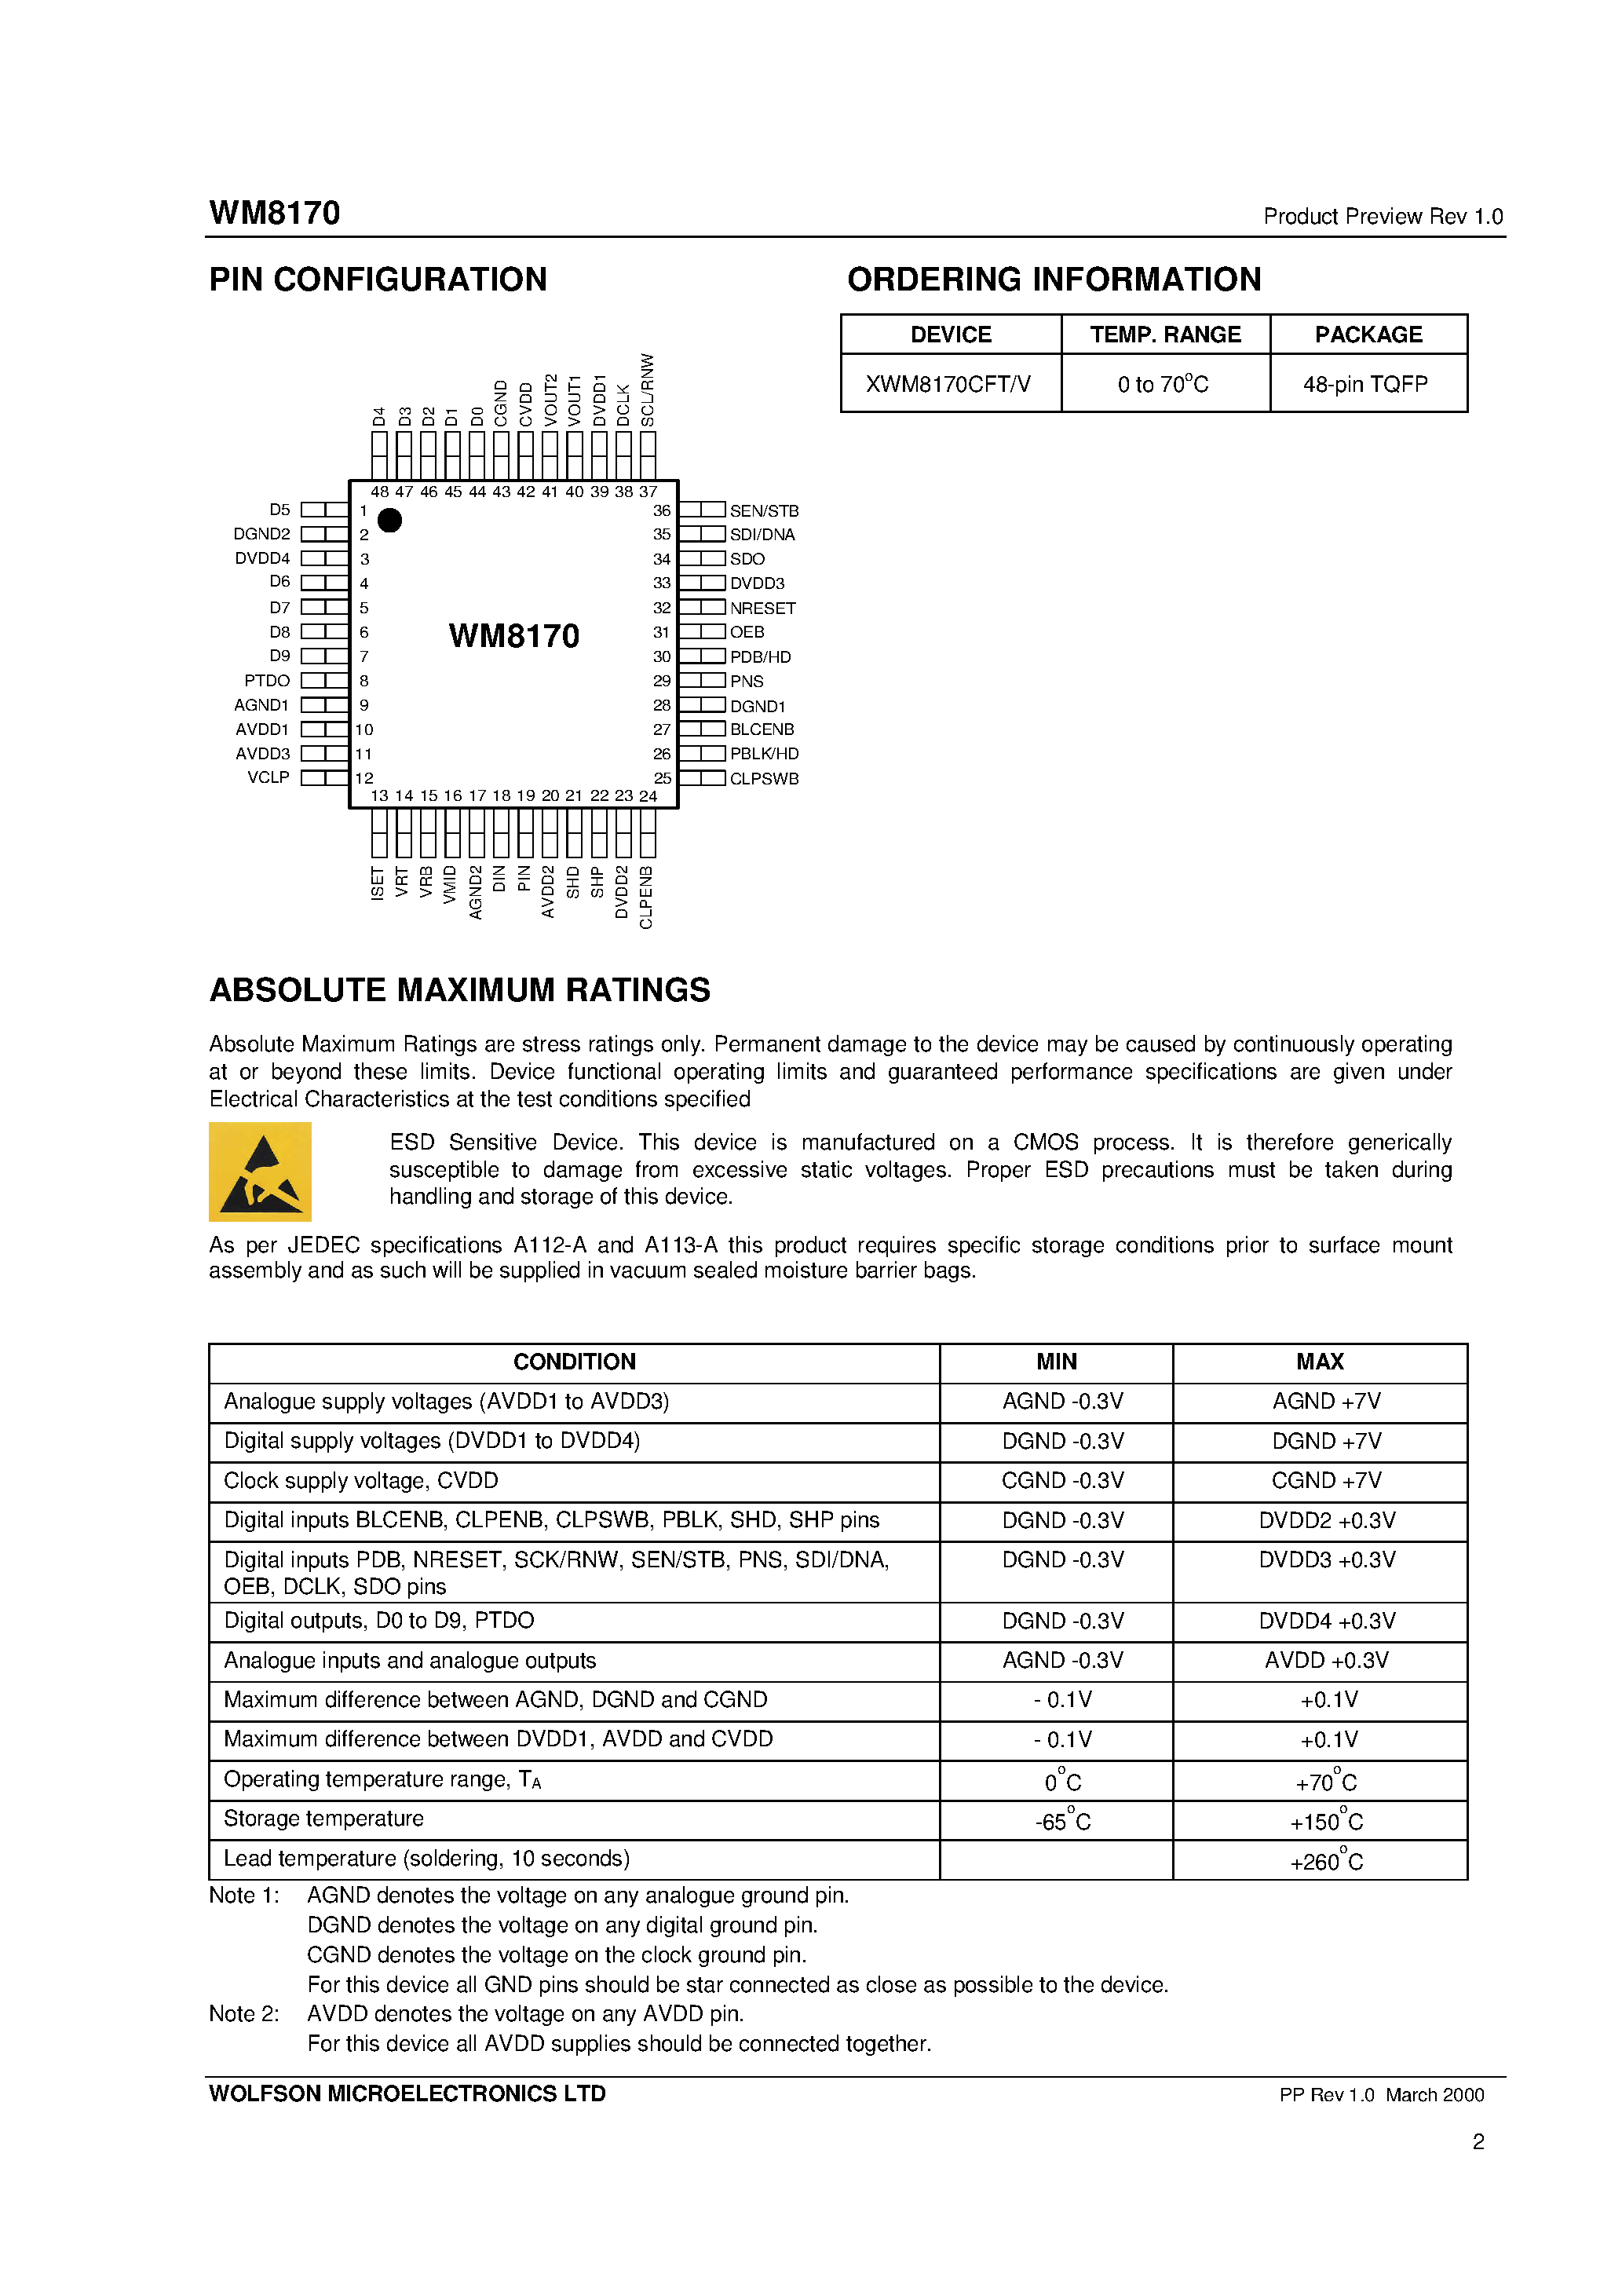 Datasheet XWM8170CFT/V - 3.3V Integrated Signal Processor for Area Array CCDs page 2